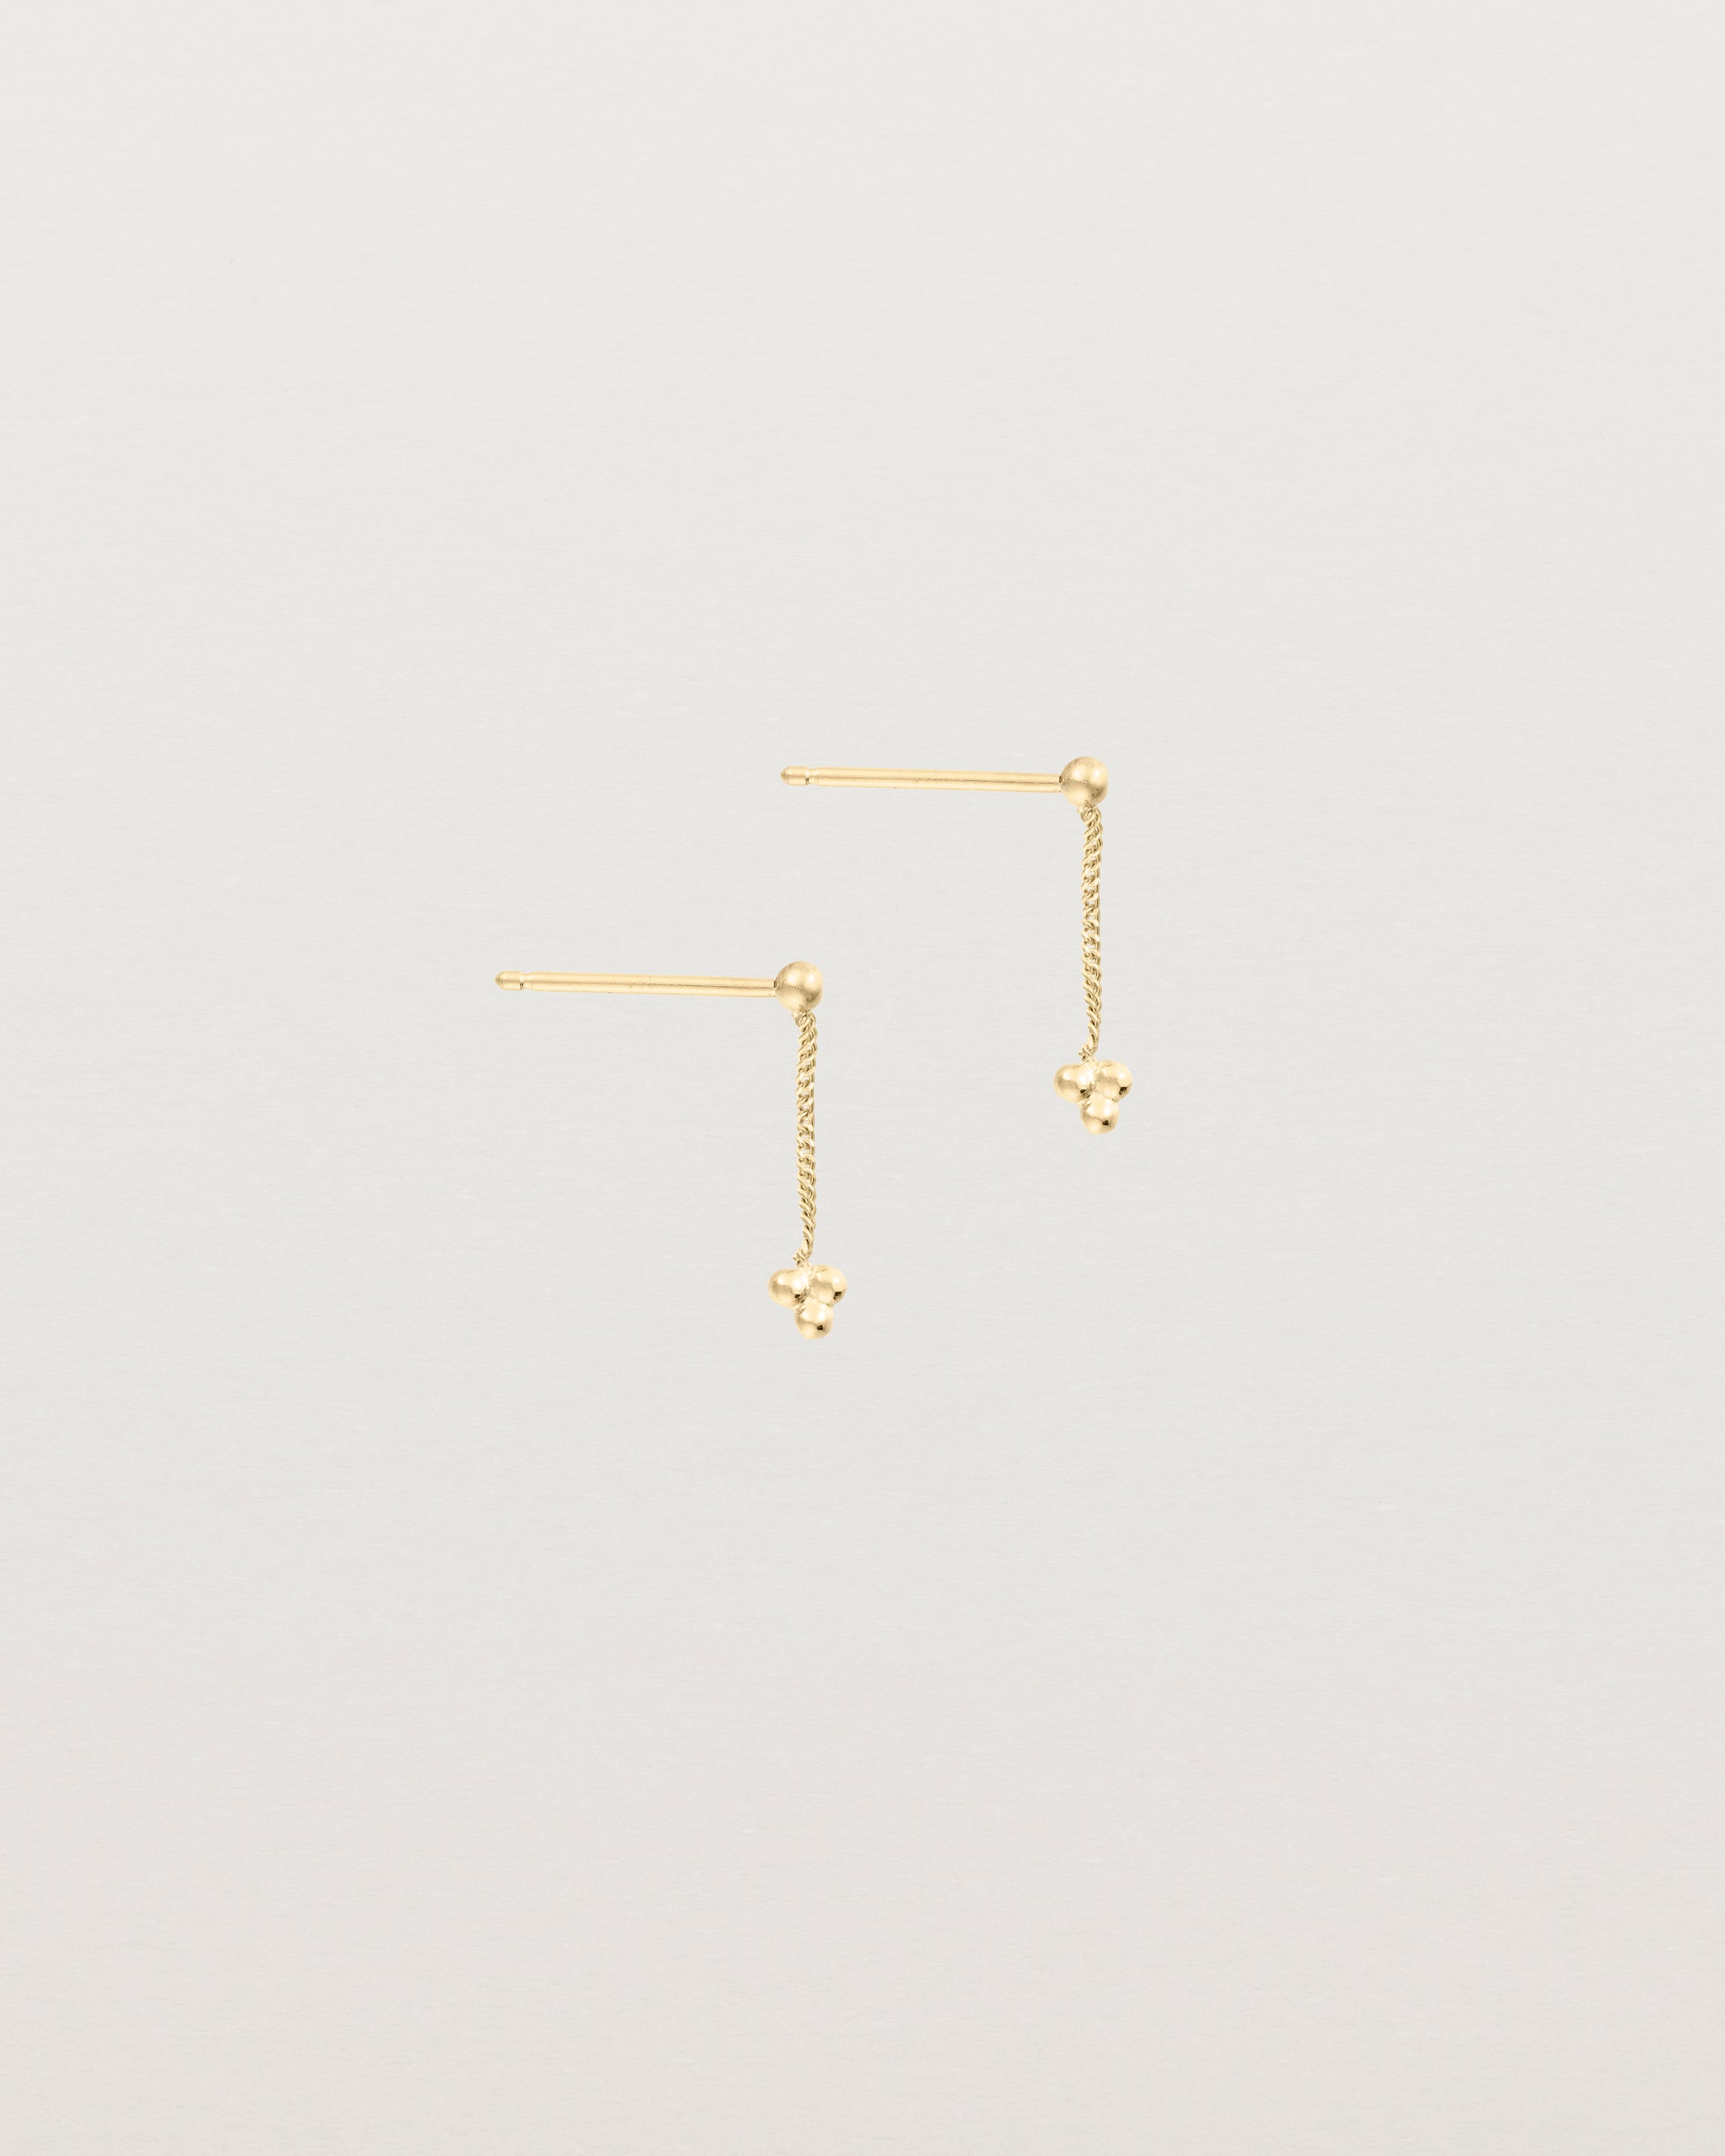 A pair of Tellue Drop Studs in Yellow Gold.